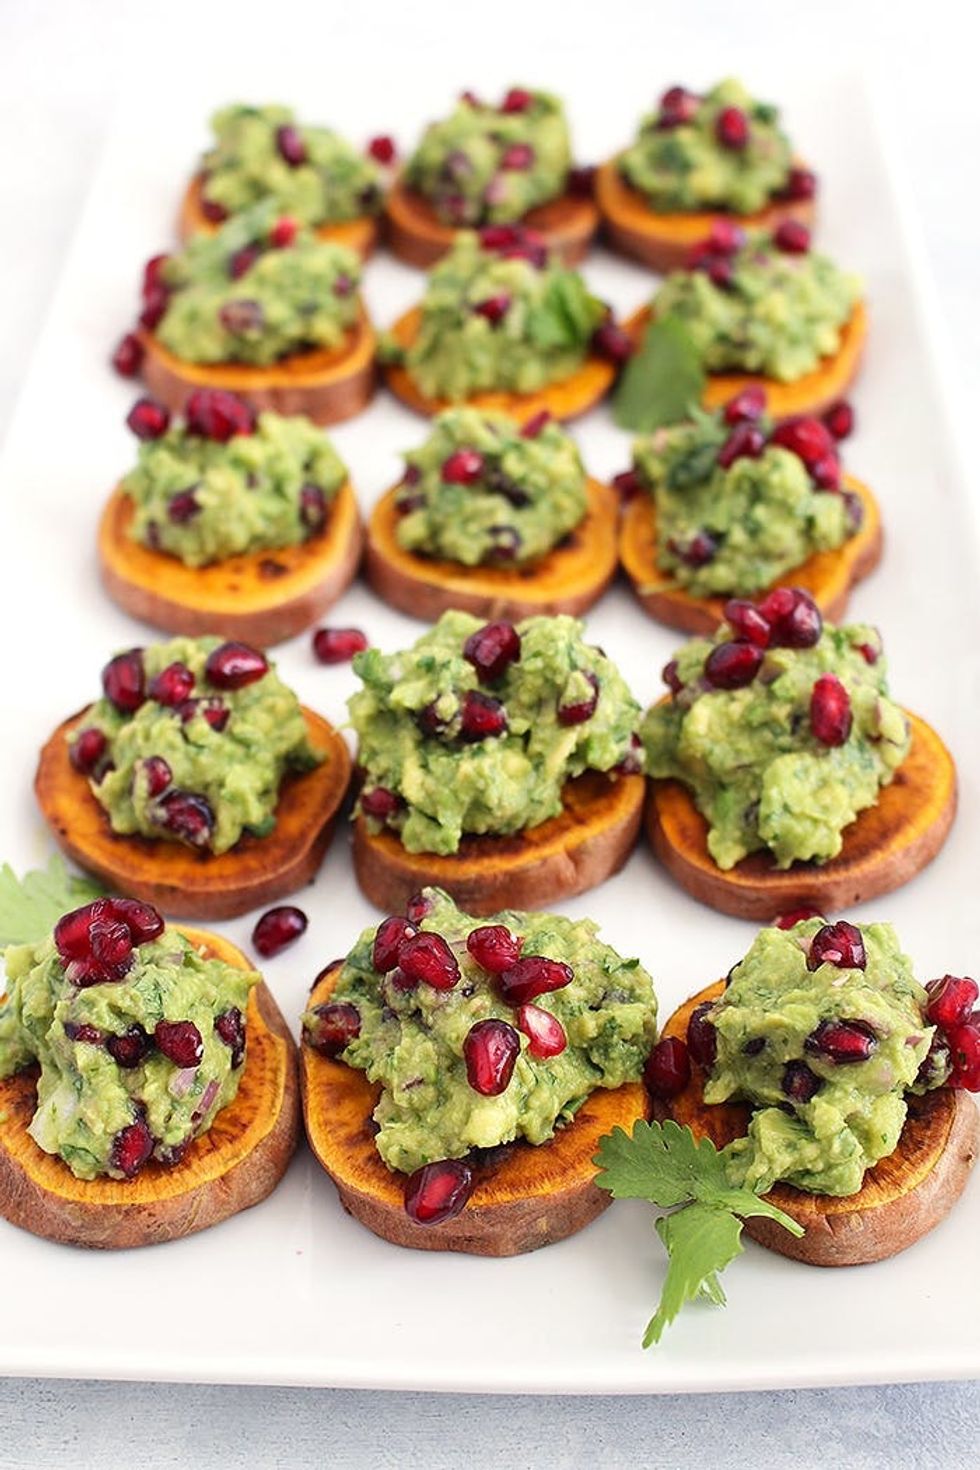 18 Easy Christmas Appetizer Recipes To Make This Holiday - Brit + Co